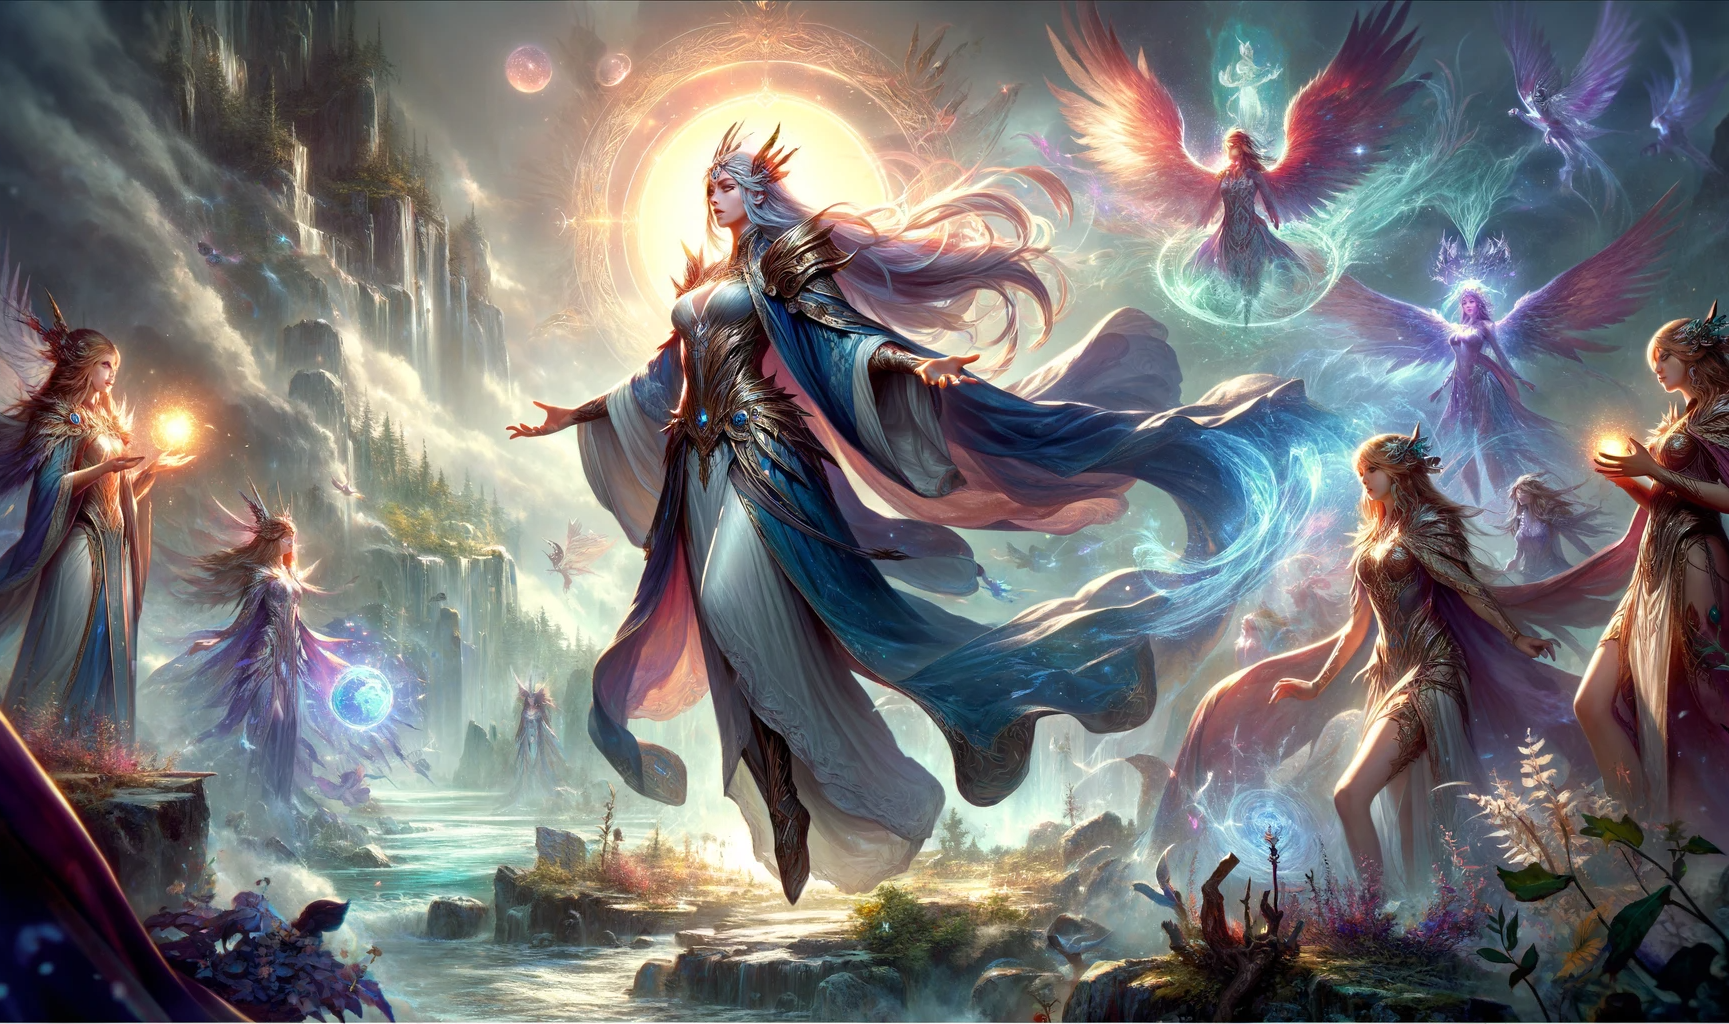 DALL·E 2023-11-25 10.26.42 - The scene depicts Tasina, a powerful and heroic sorceress, standing majestically in a magical realm. She is portrayed as a strong, wise figure, embody